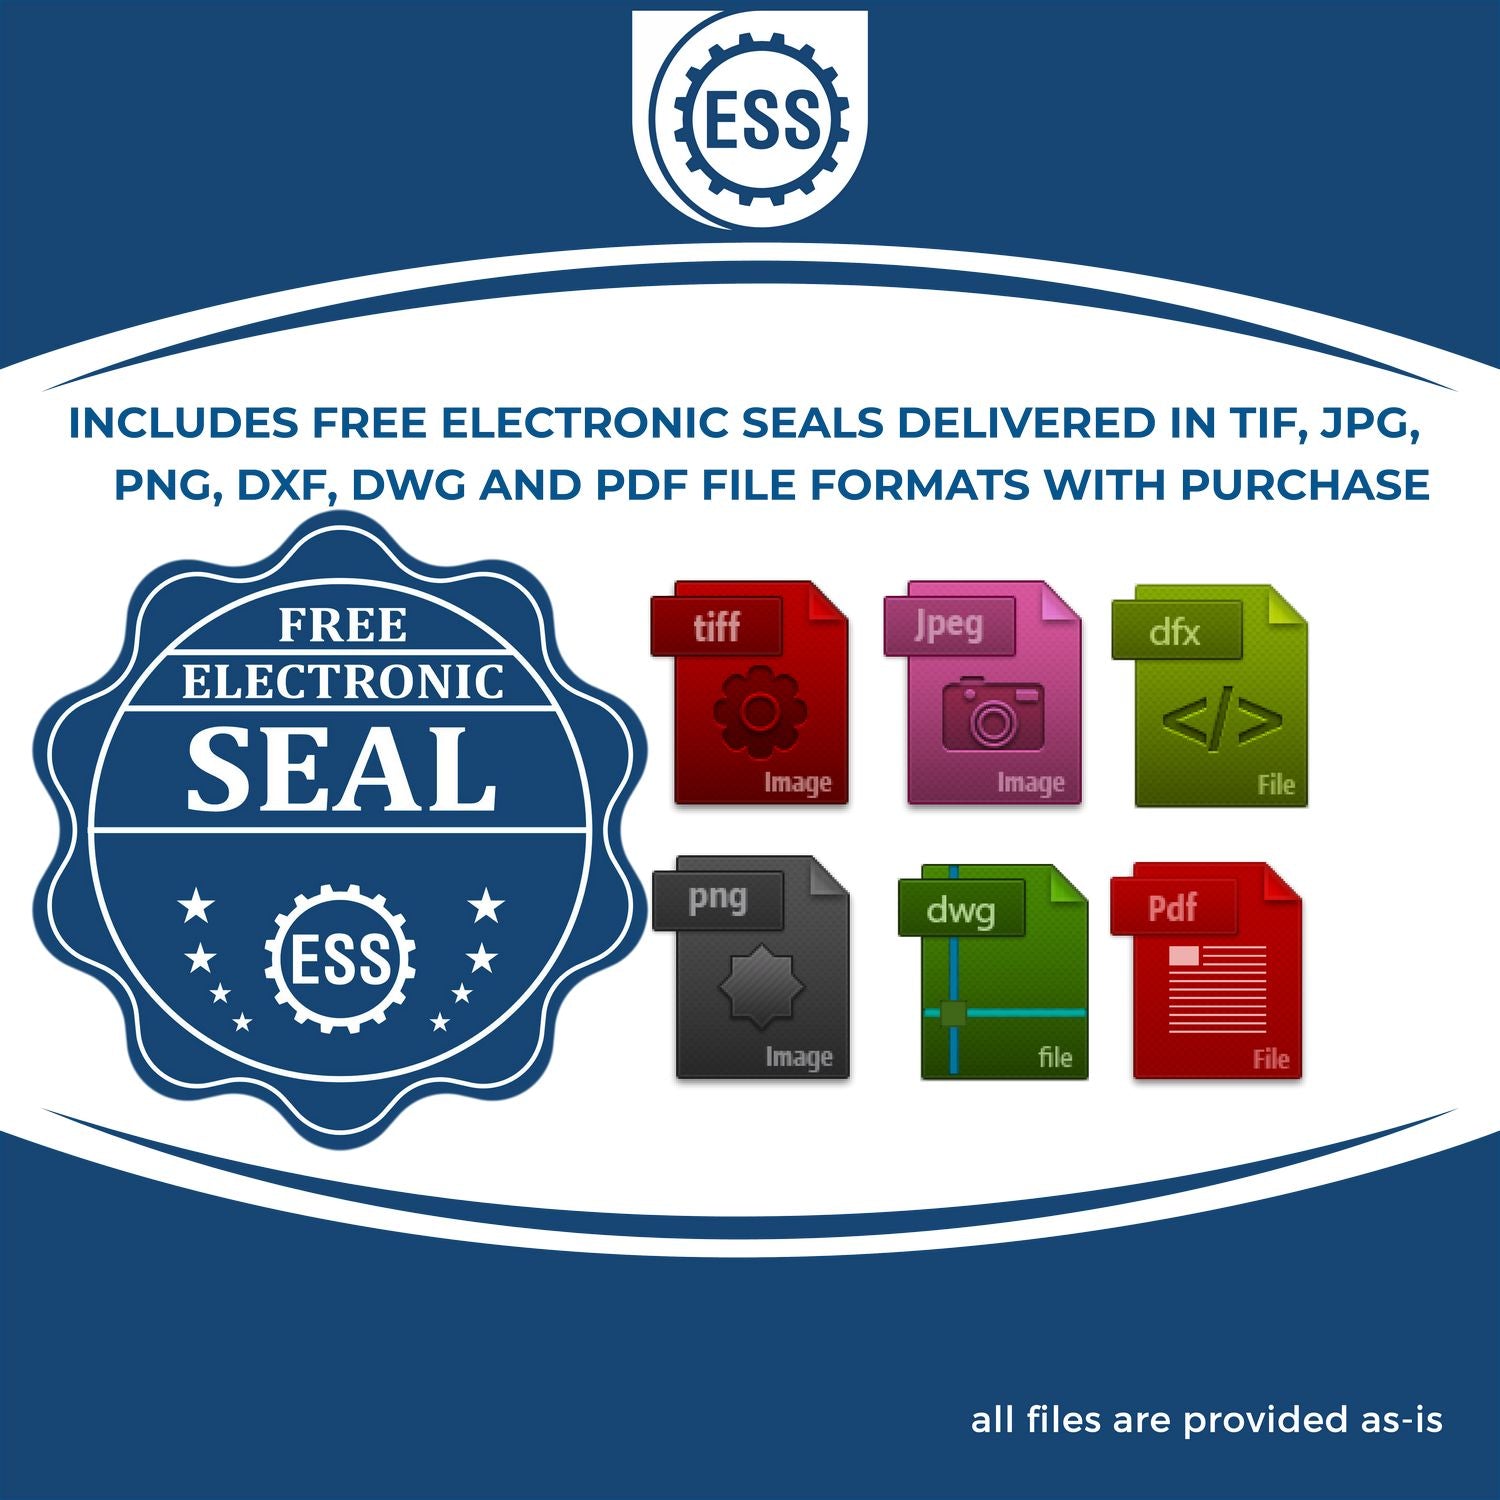 An infographic for the free electronic seal for the Hybrid Oregon Engineer Seal illustrating the different file type icons such as DXF, DWG, TIF, JPG and PNG.